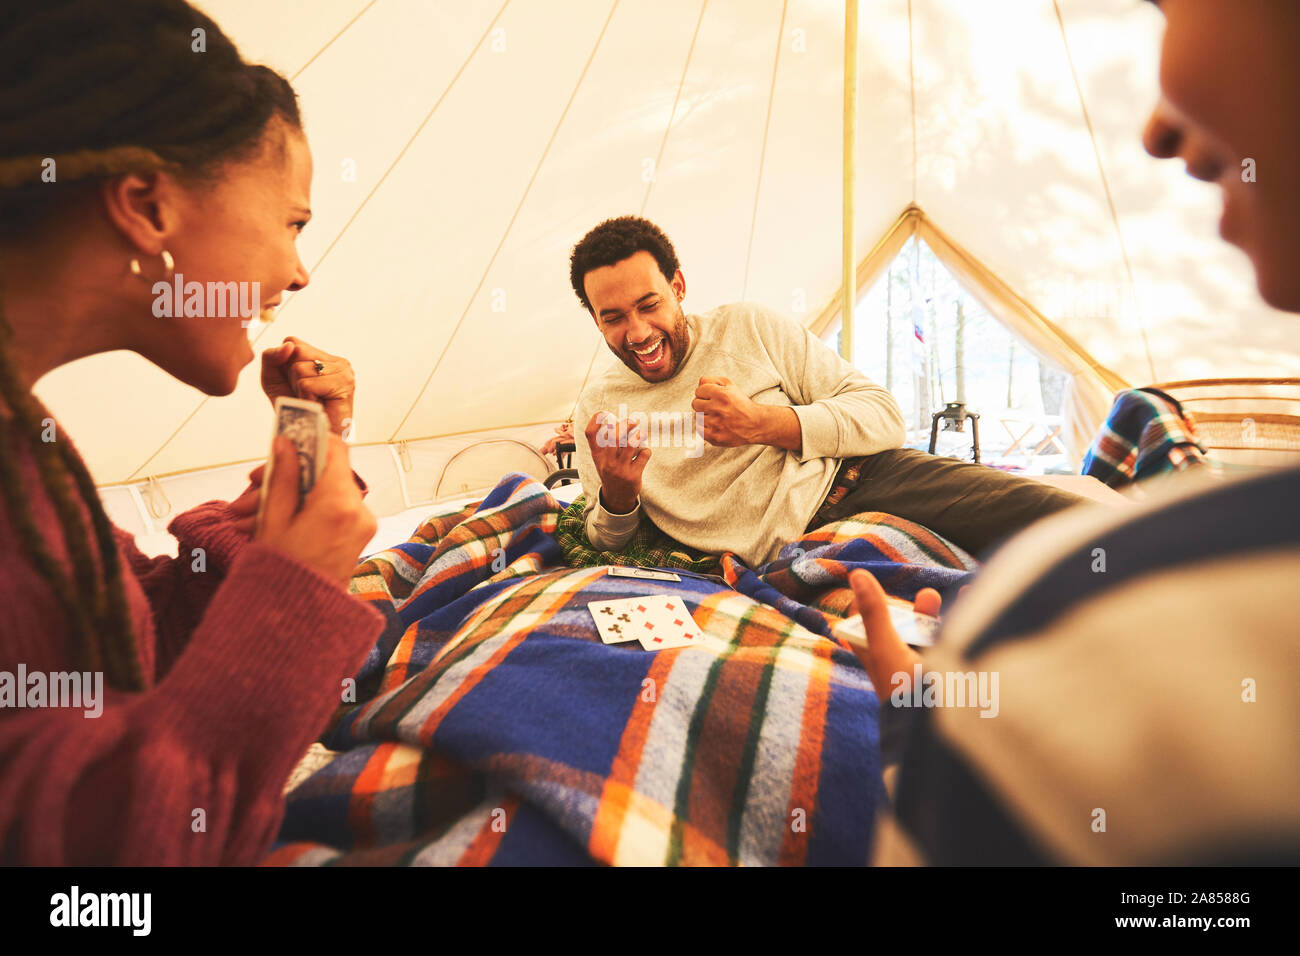 Family playing cards inside camping yurt Stock Photo